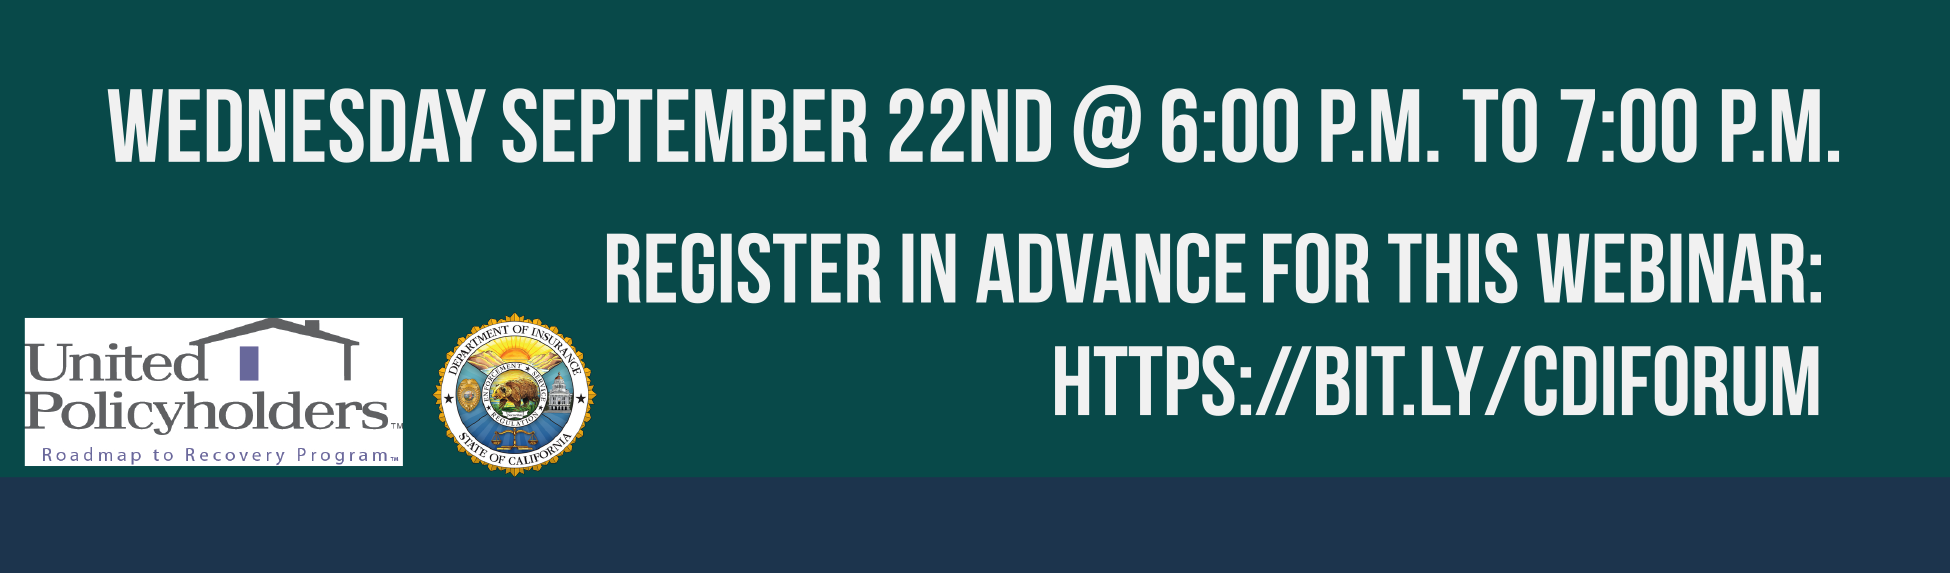 Wednesday September 22nd at 6PM to 7PM/register in advance for this webinar: https://bit.ly/cdiforum